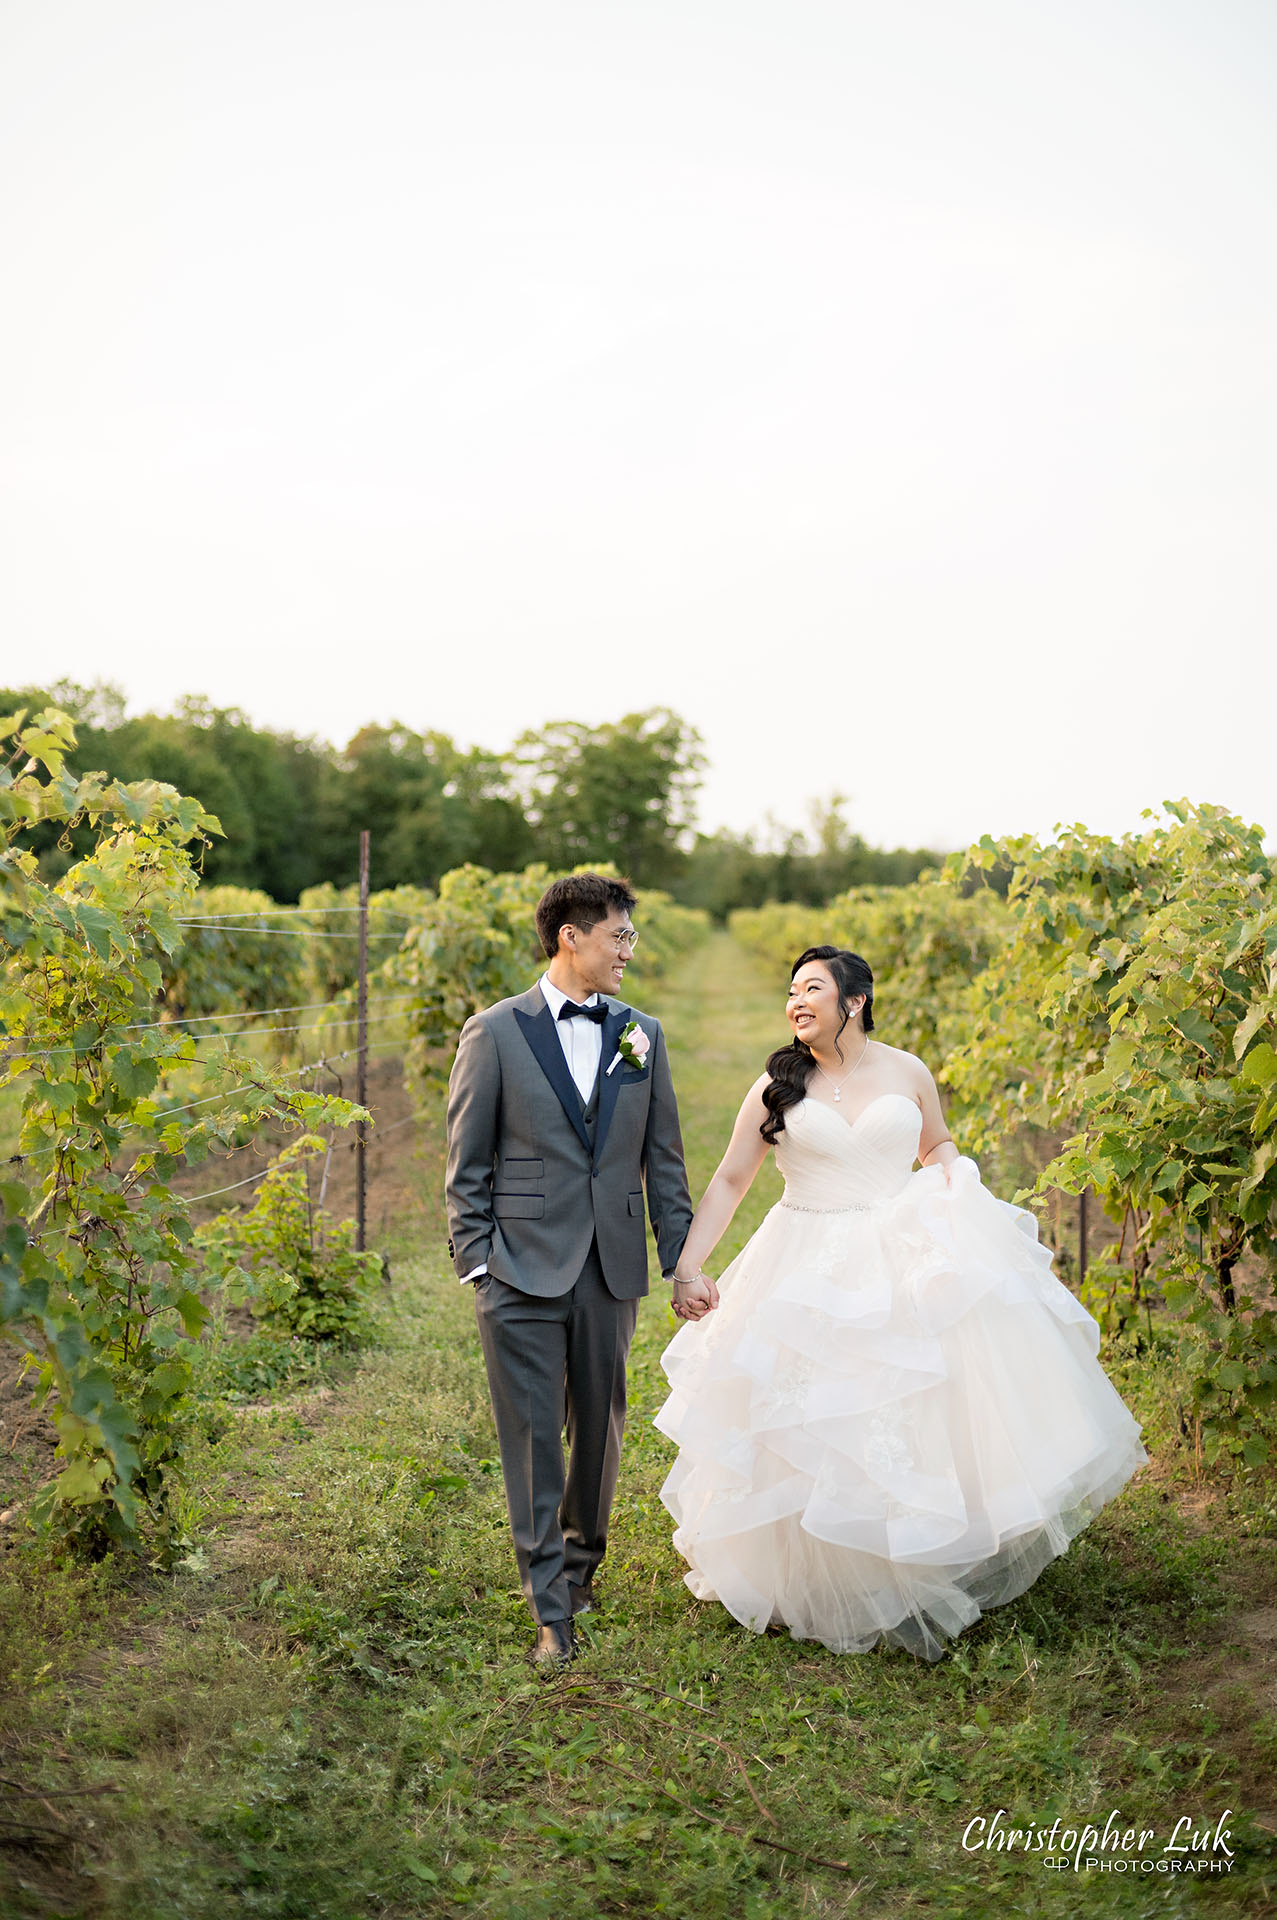 Willow Springs Winery Bride Groom Portrait Candid Natural Photojournalistic Vineyard Rows of Grape Vines Holding Hands Walking Together